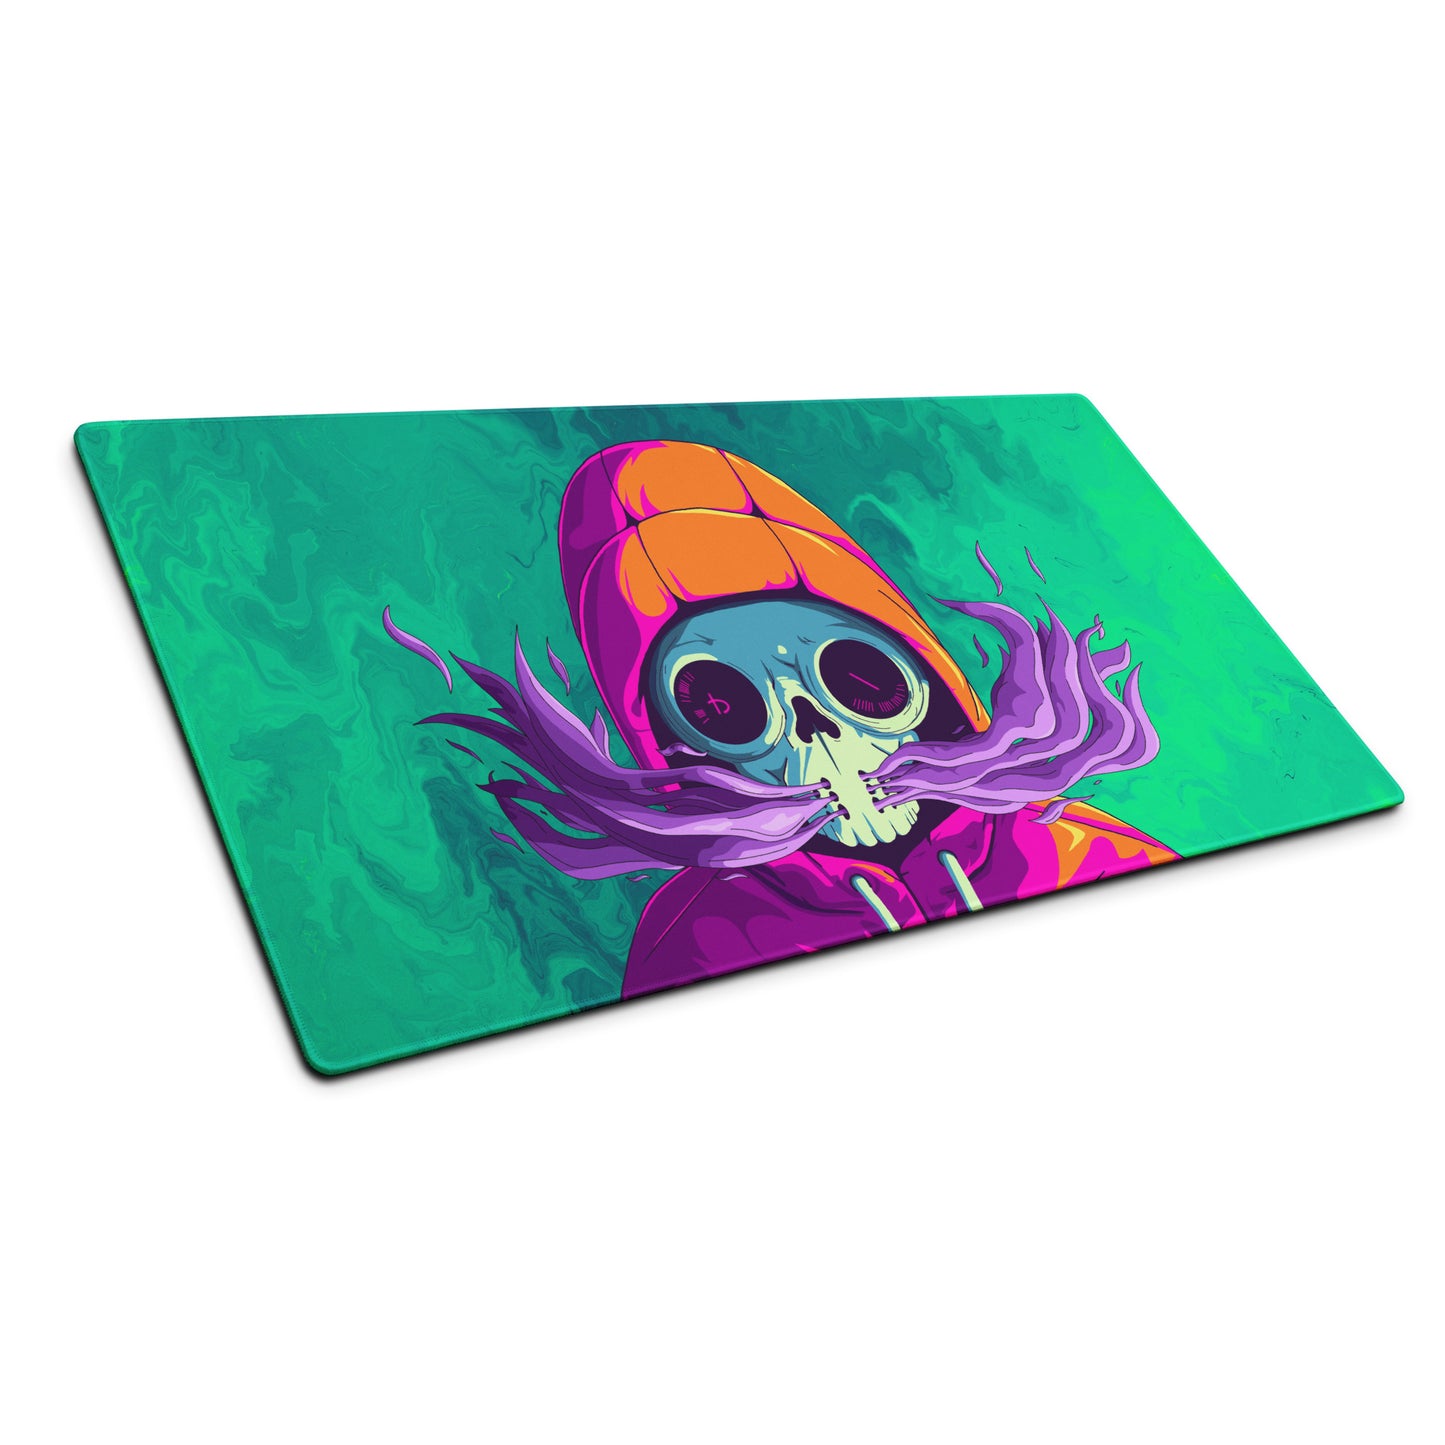 A 36" x 18" desk pad with a man wearing a skull gas mask breathing smoke out from it shown at an angle. Green in color.